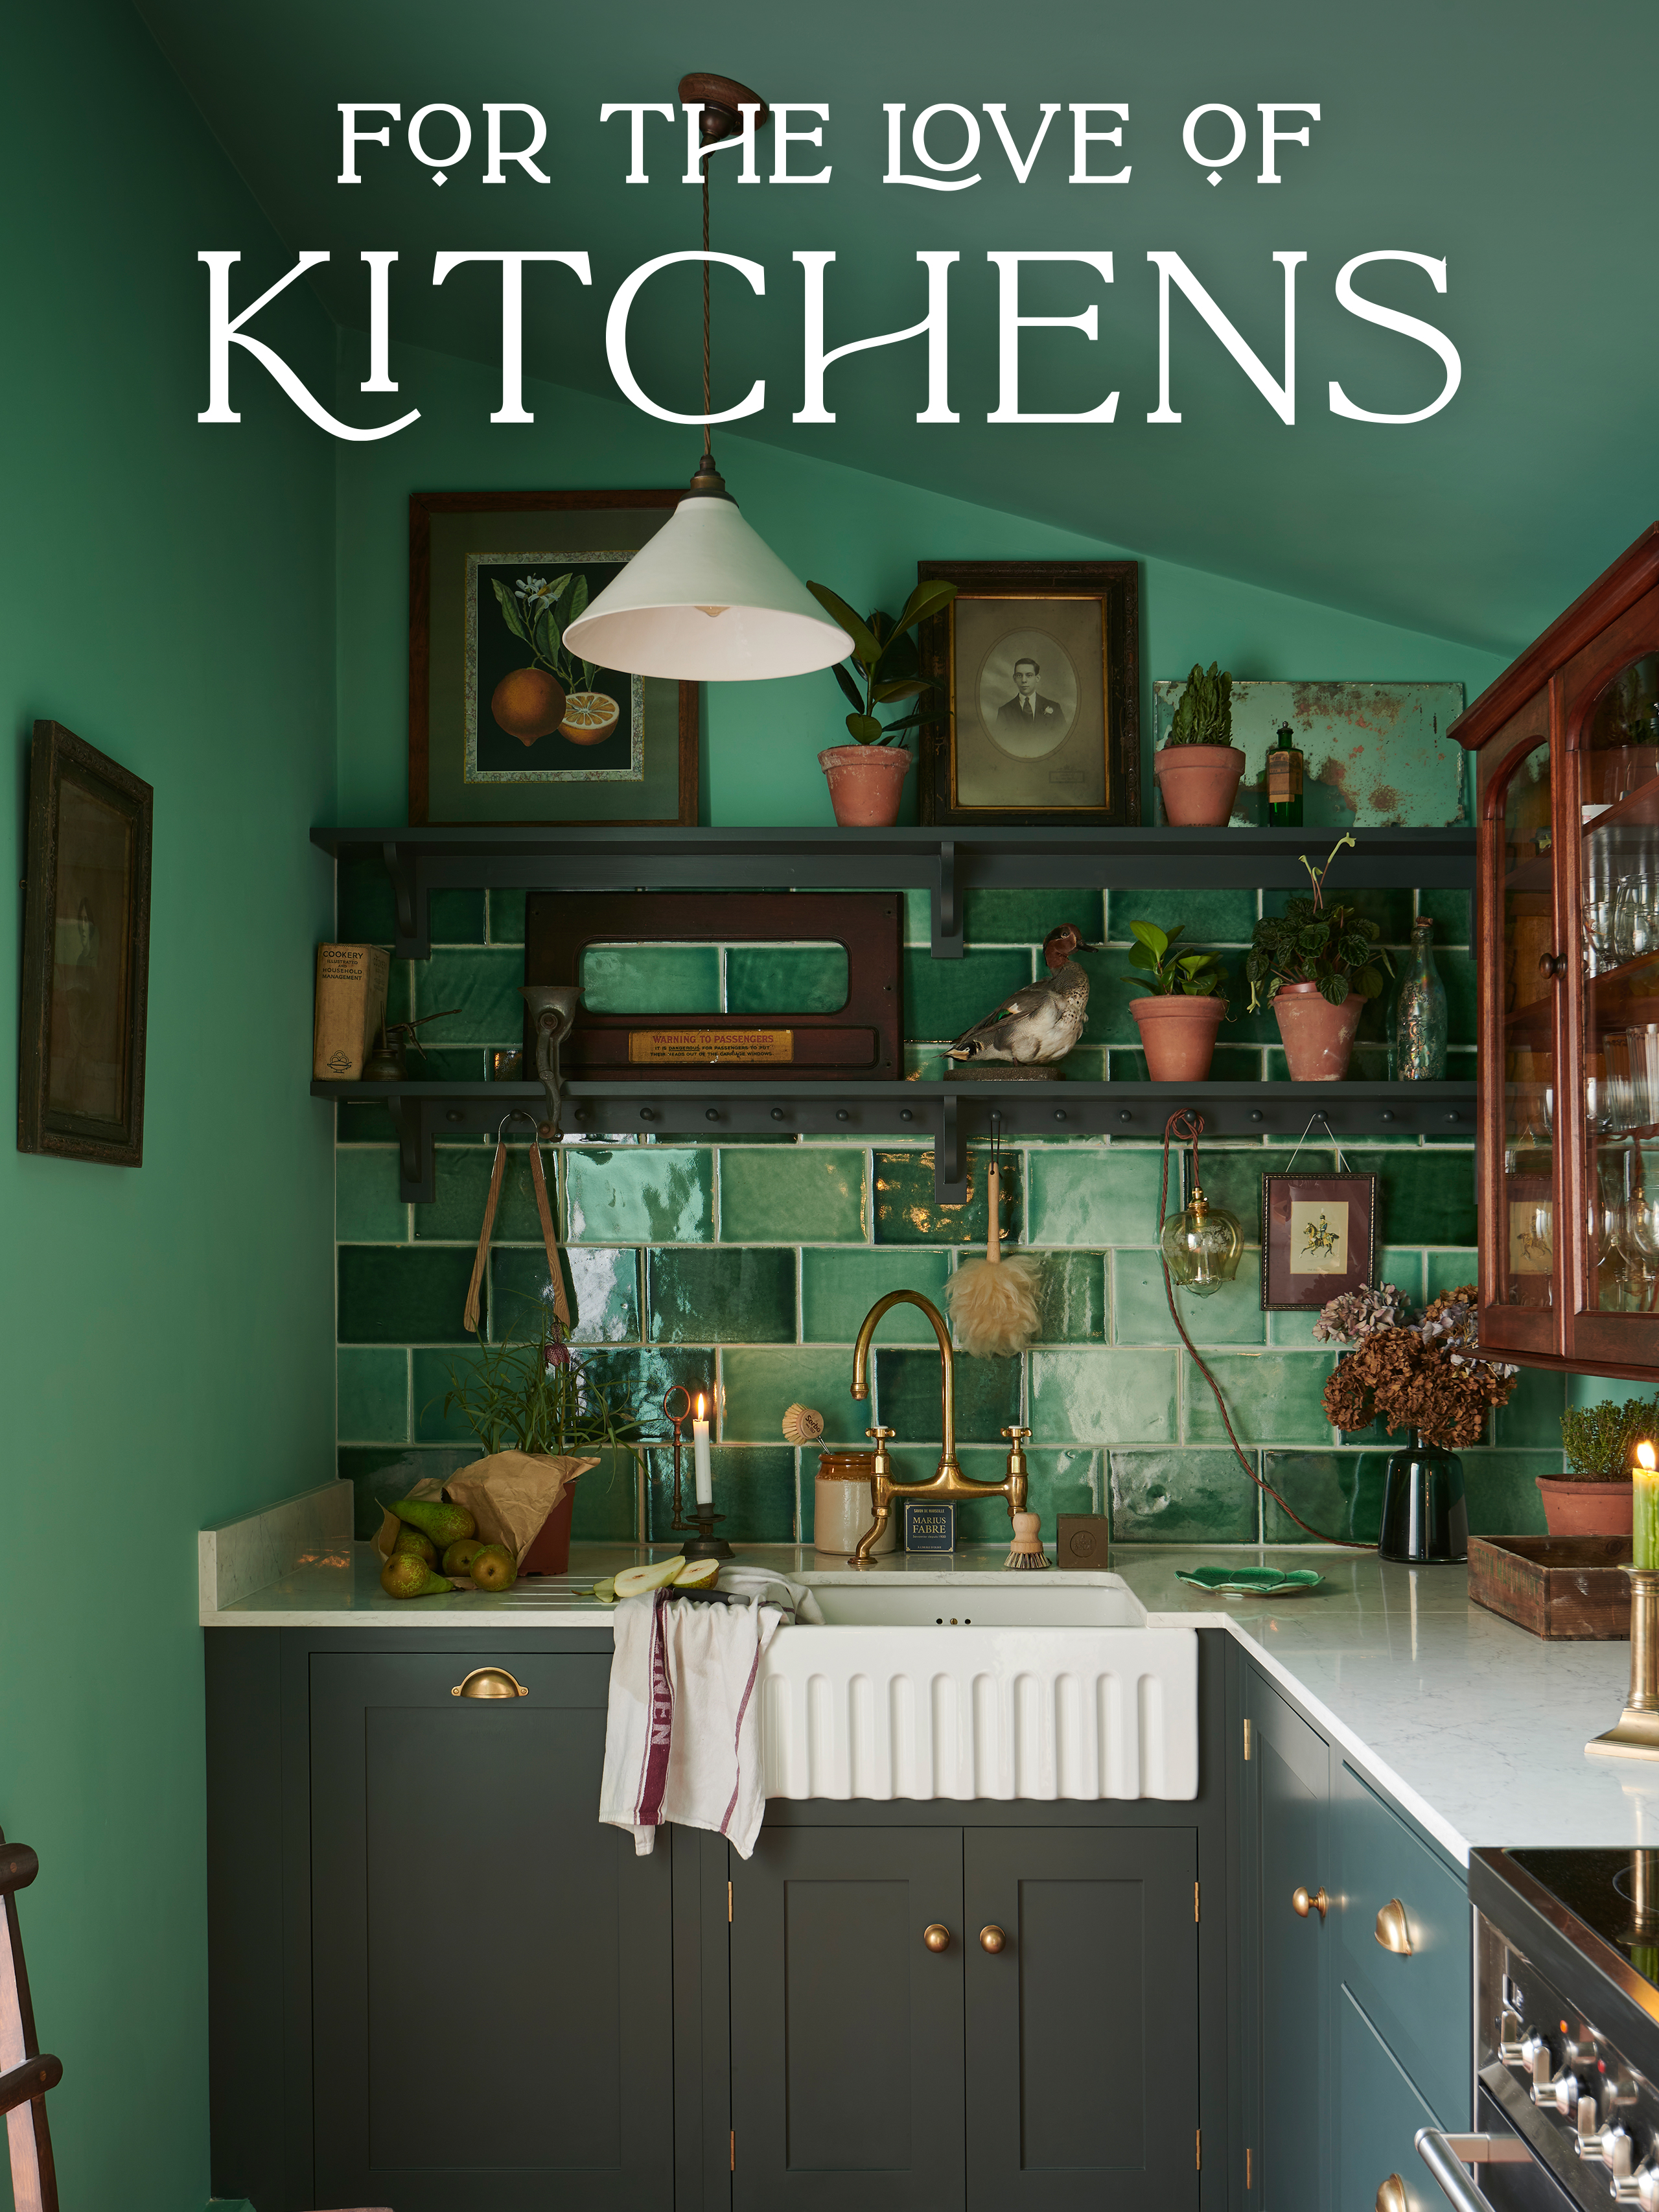 For the Love of Kitchens on HBO